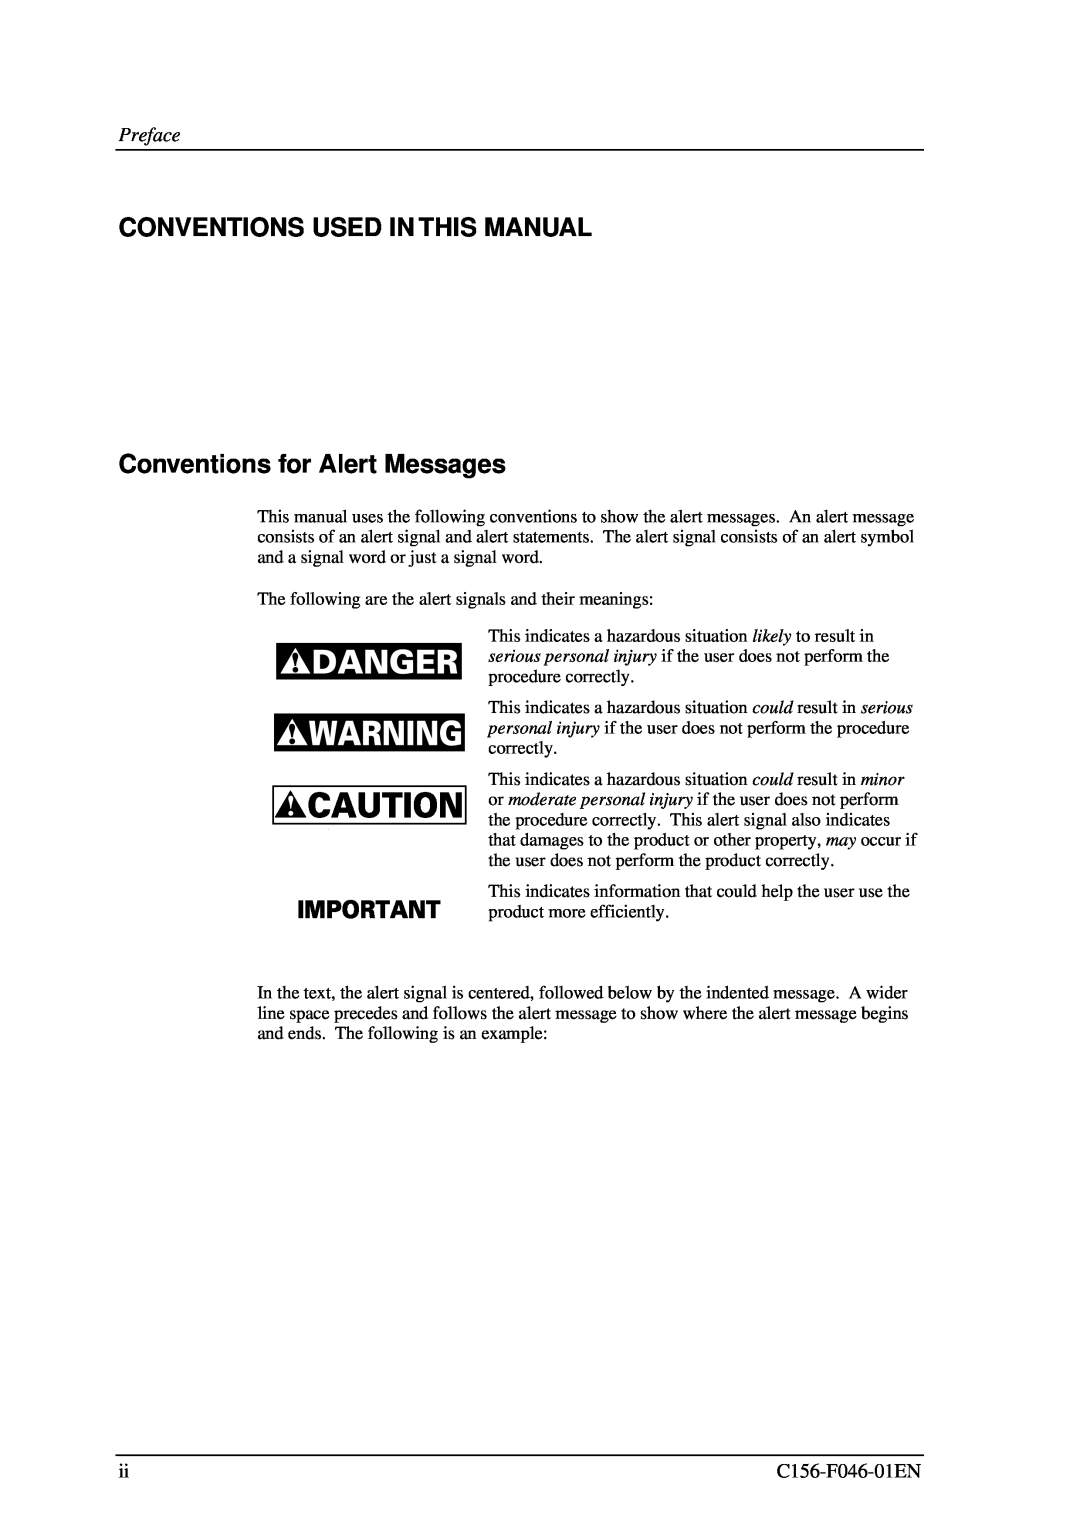 Fujitsu MDG3064UB, MDG3130UB manual CONVENTIONS USED IN THIS MANUAL Conventions for Alert Messages, Preface 